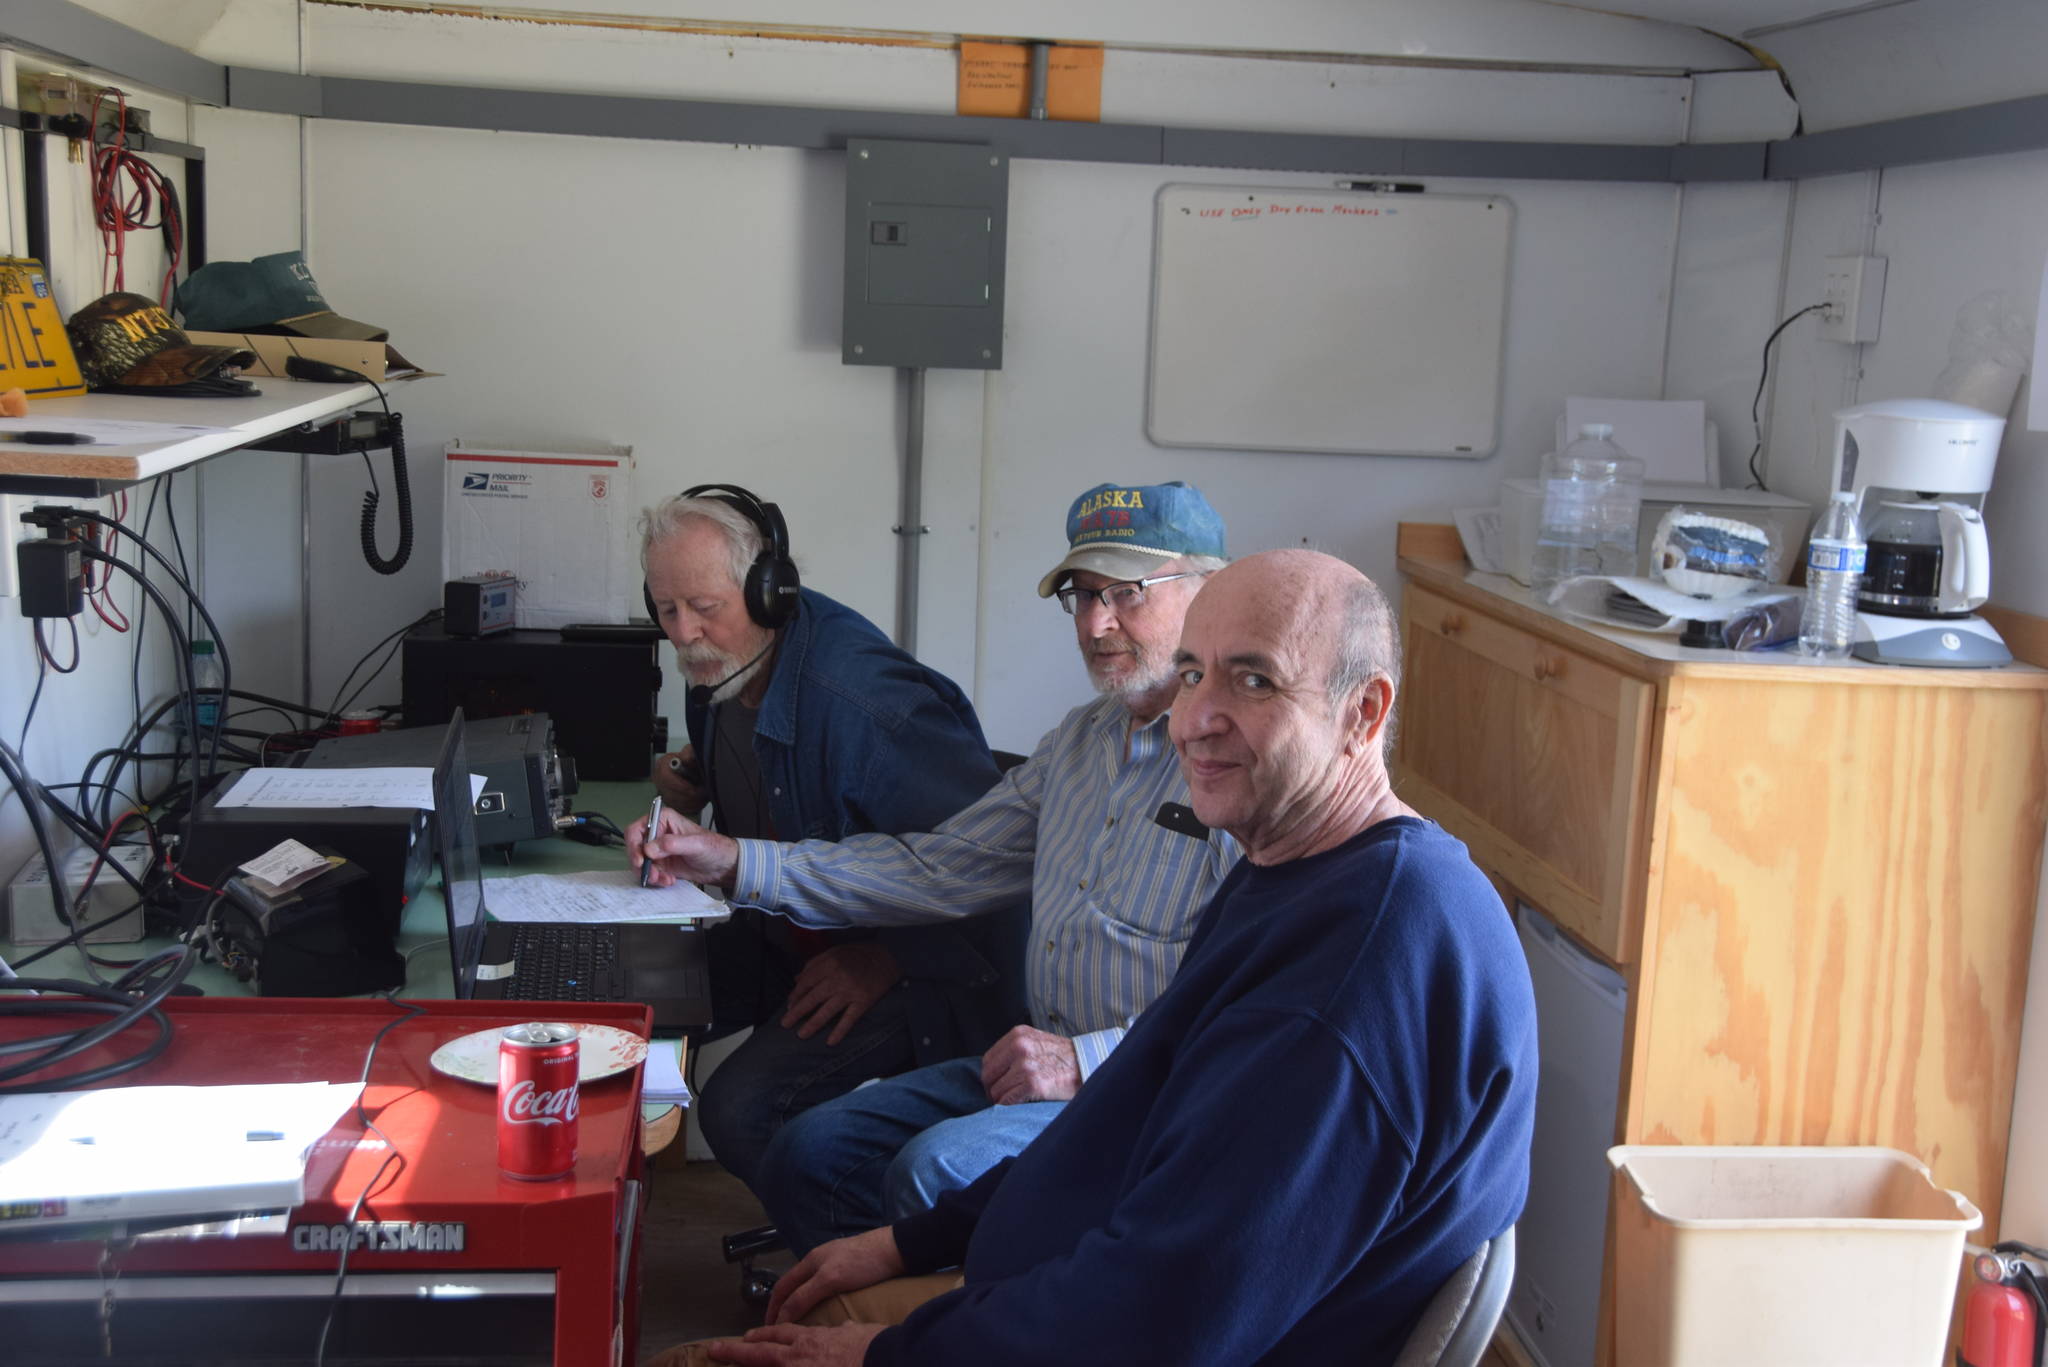 From left, George Van Lone, Max Carpenter and Ed Seaward monitor the airwaves inside the Moose Horn Amateur Radio Club’s mobile operation center in Kenai, Alaska during the Amateur Radio Relay League’s annual Field Day on June 22, 2019. (Photo by Brian Mazurek/Peninsula Clarion)